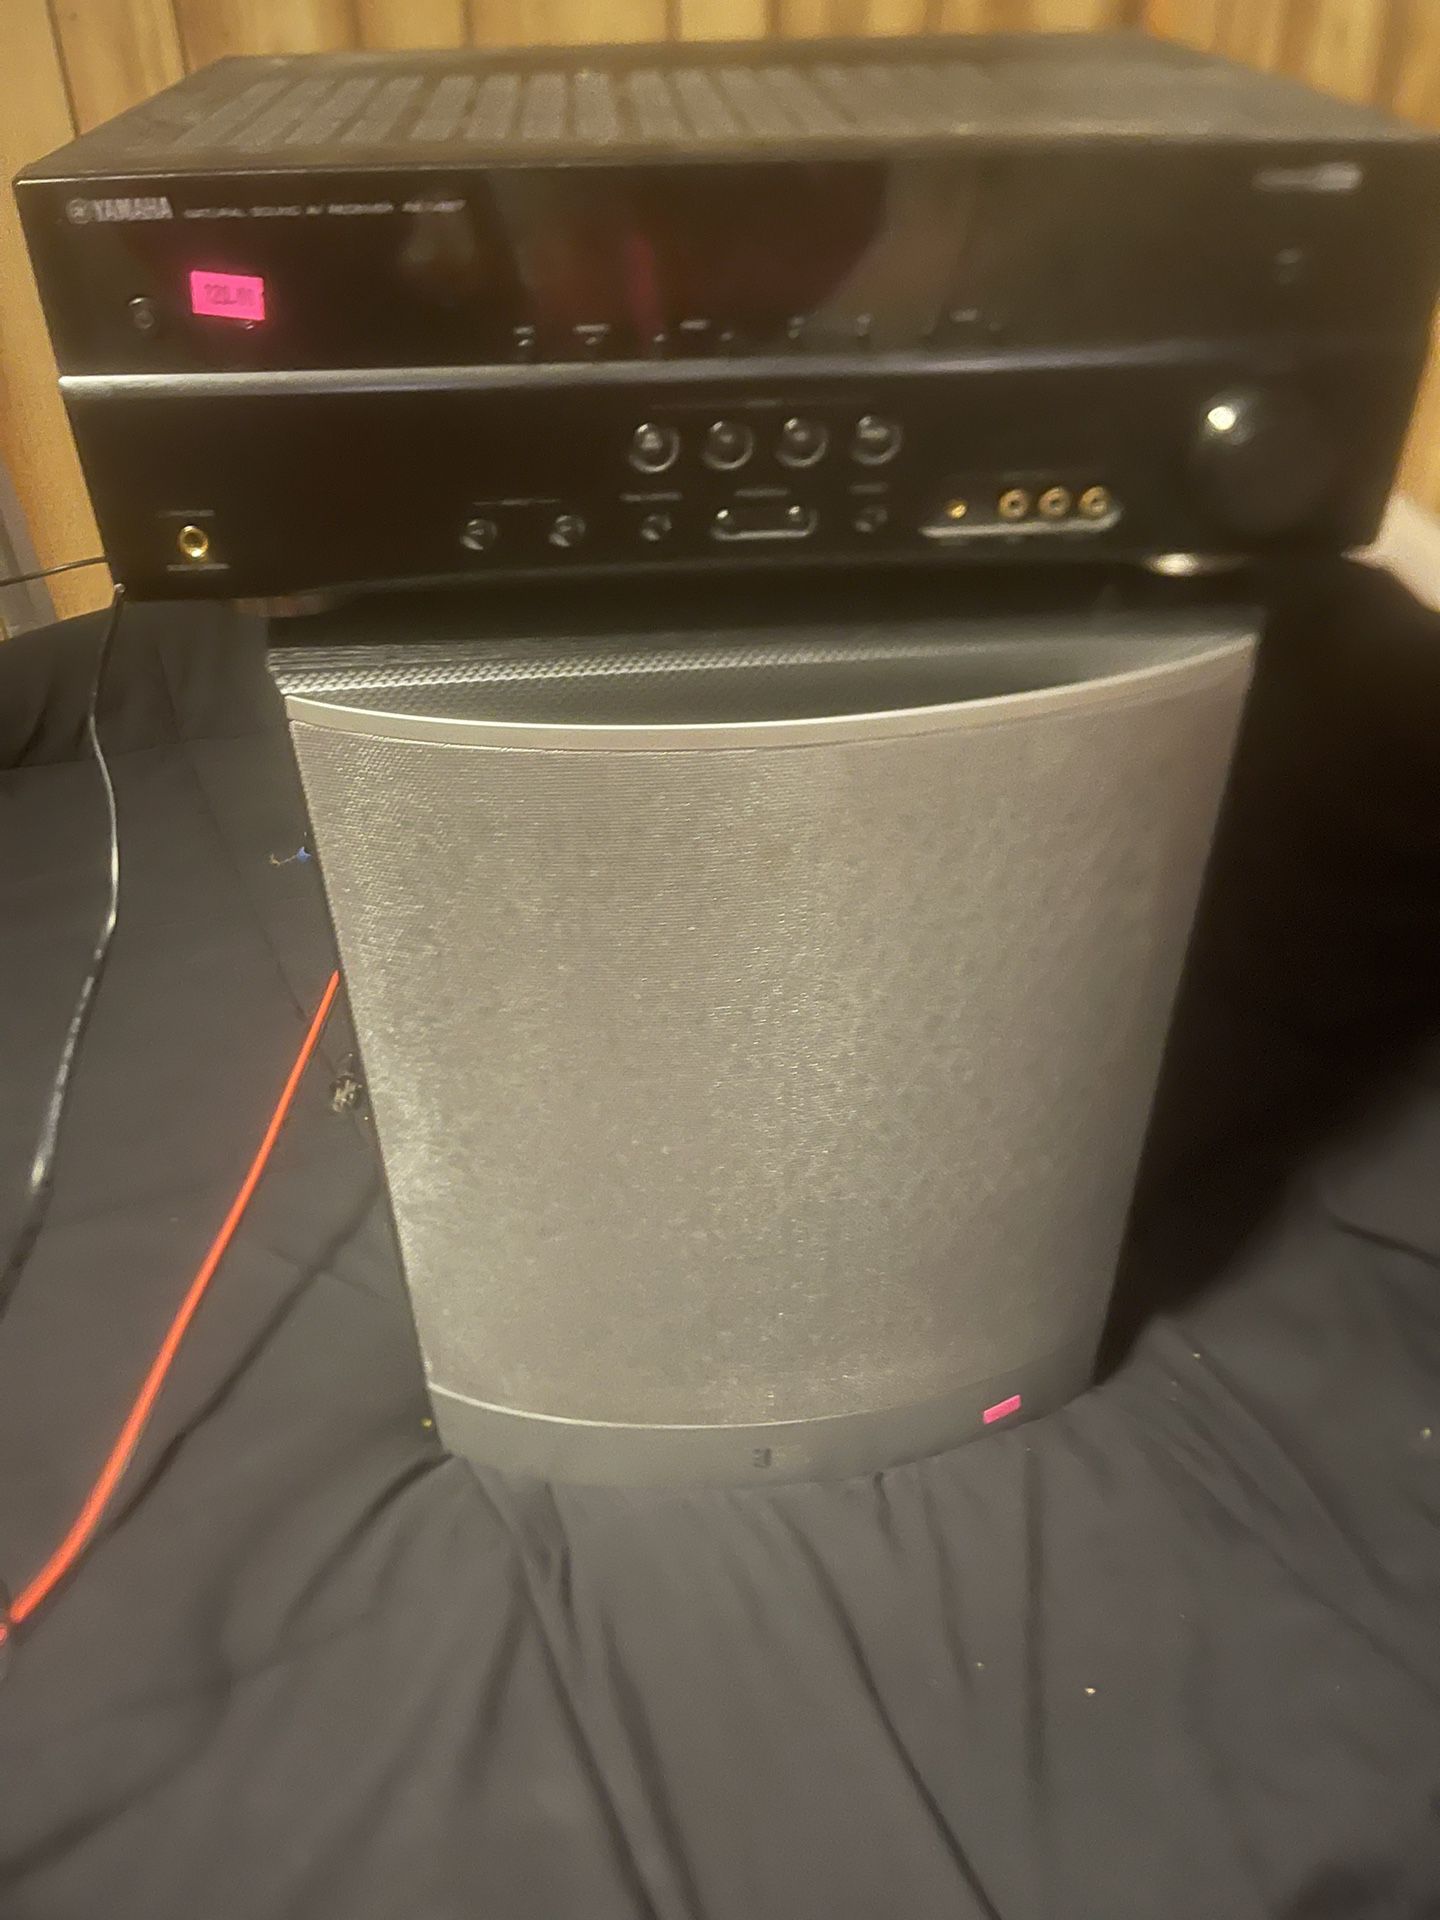 JBL surroundsound speakers with a 12 inch JBL subwoofer also Yamaha receiver